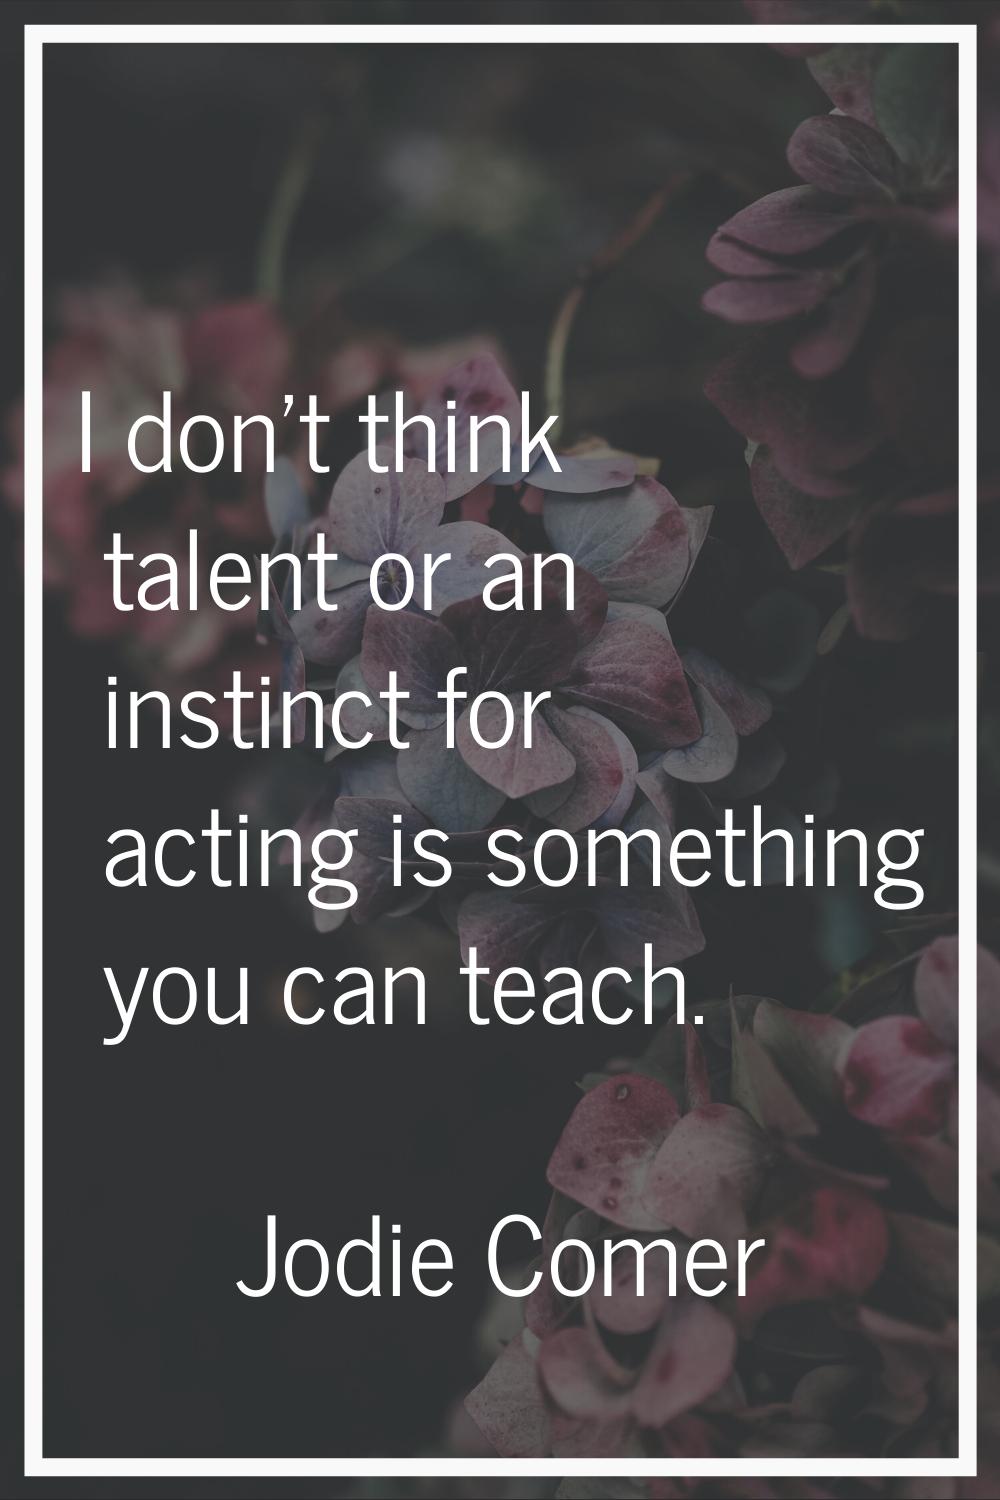 I don't think talent or an instinct for acting is something you can teach.